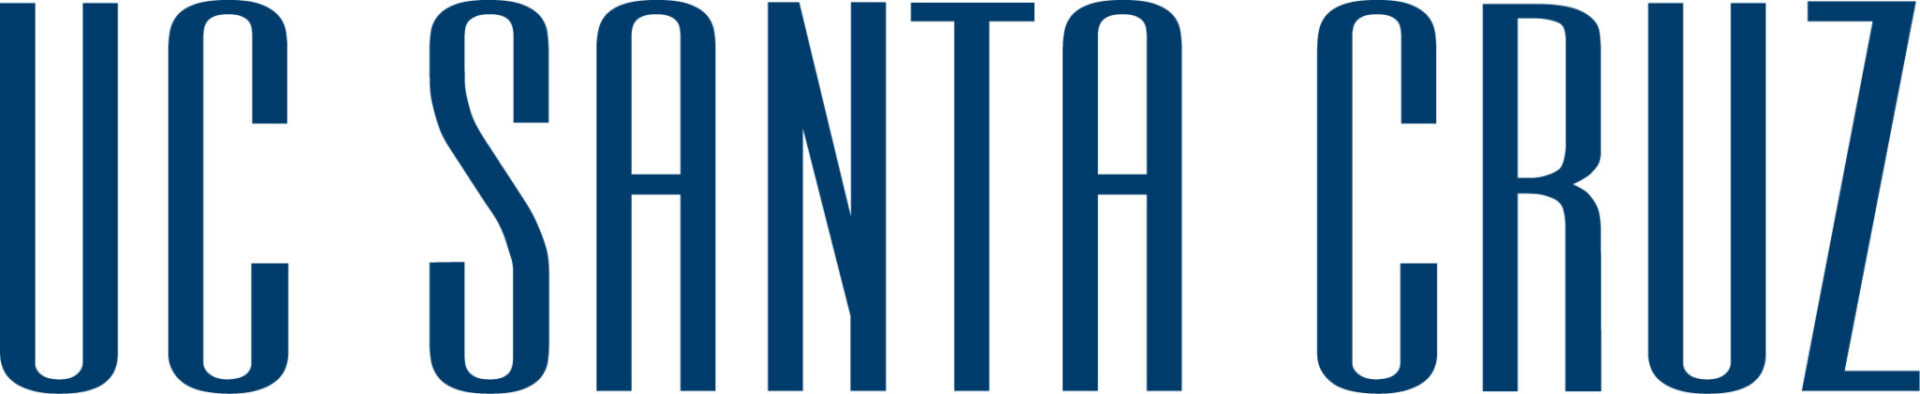 A blue and white logo of the national association for women.